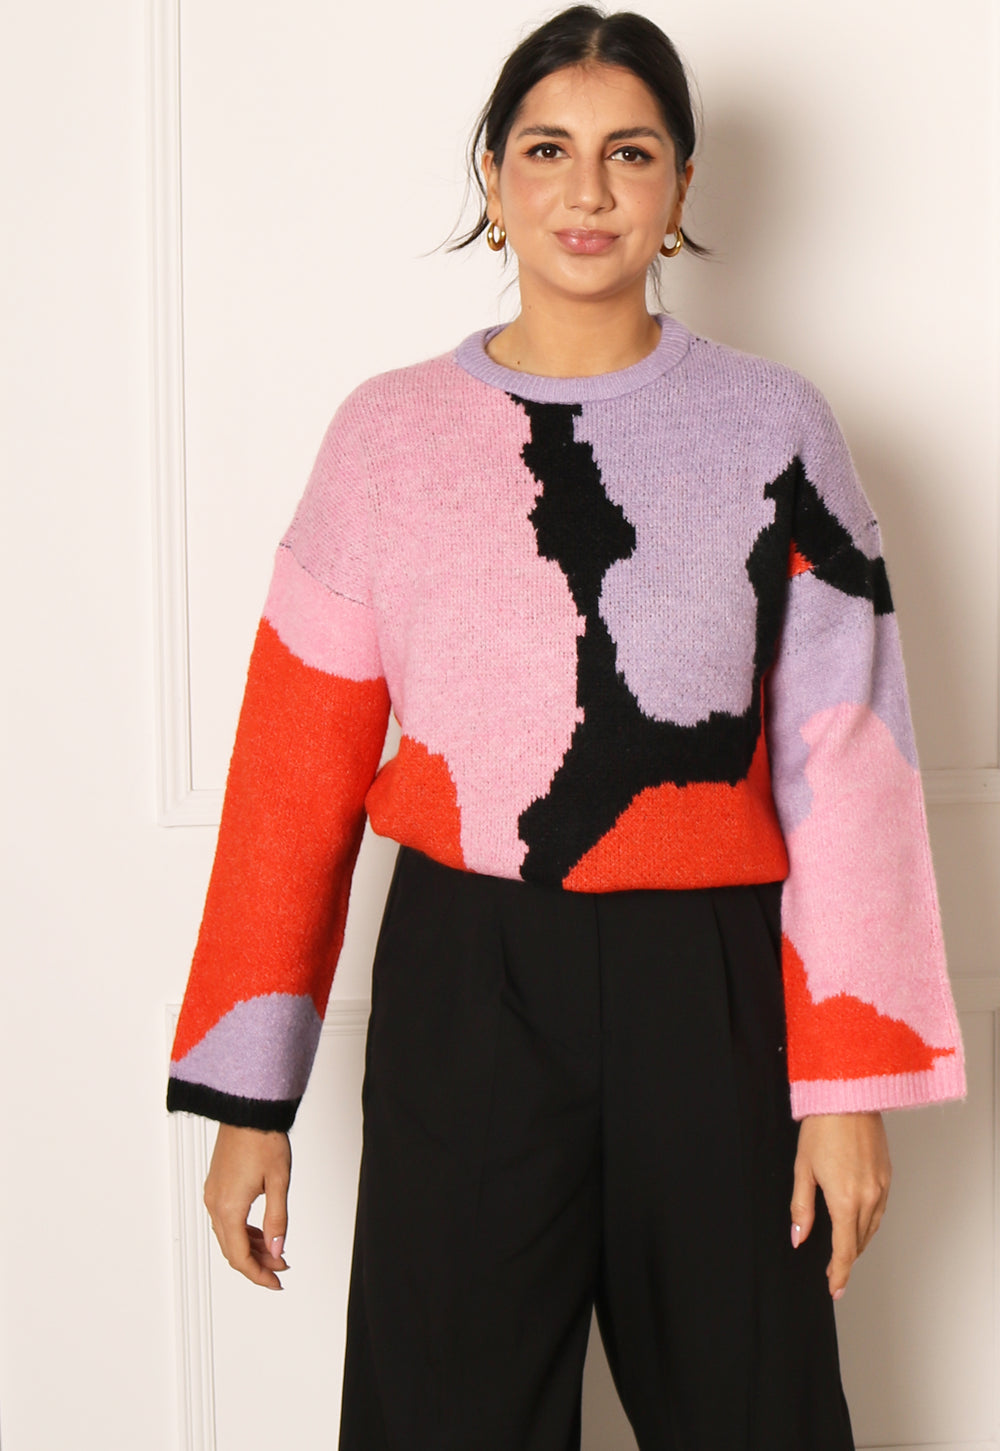 VERO MODA Florence Fluffy Abstract Colour Block Chunky Knit Jumper in Pink, Red & Lilac - One Nation Clothing